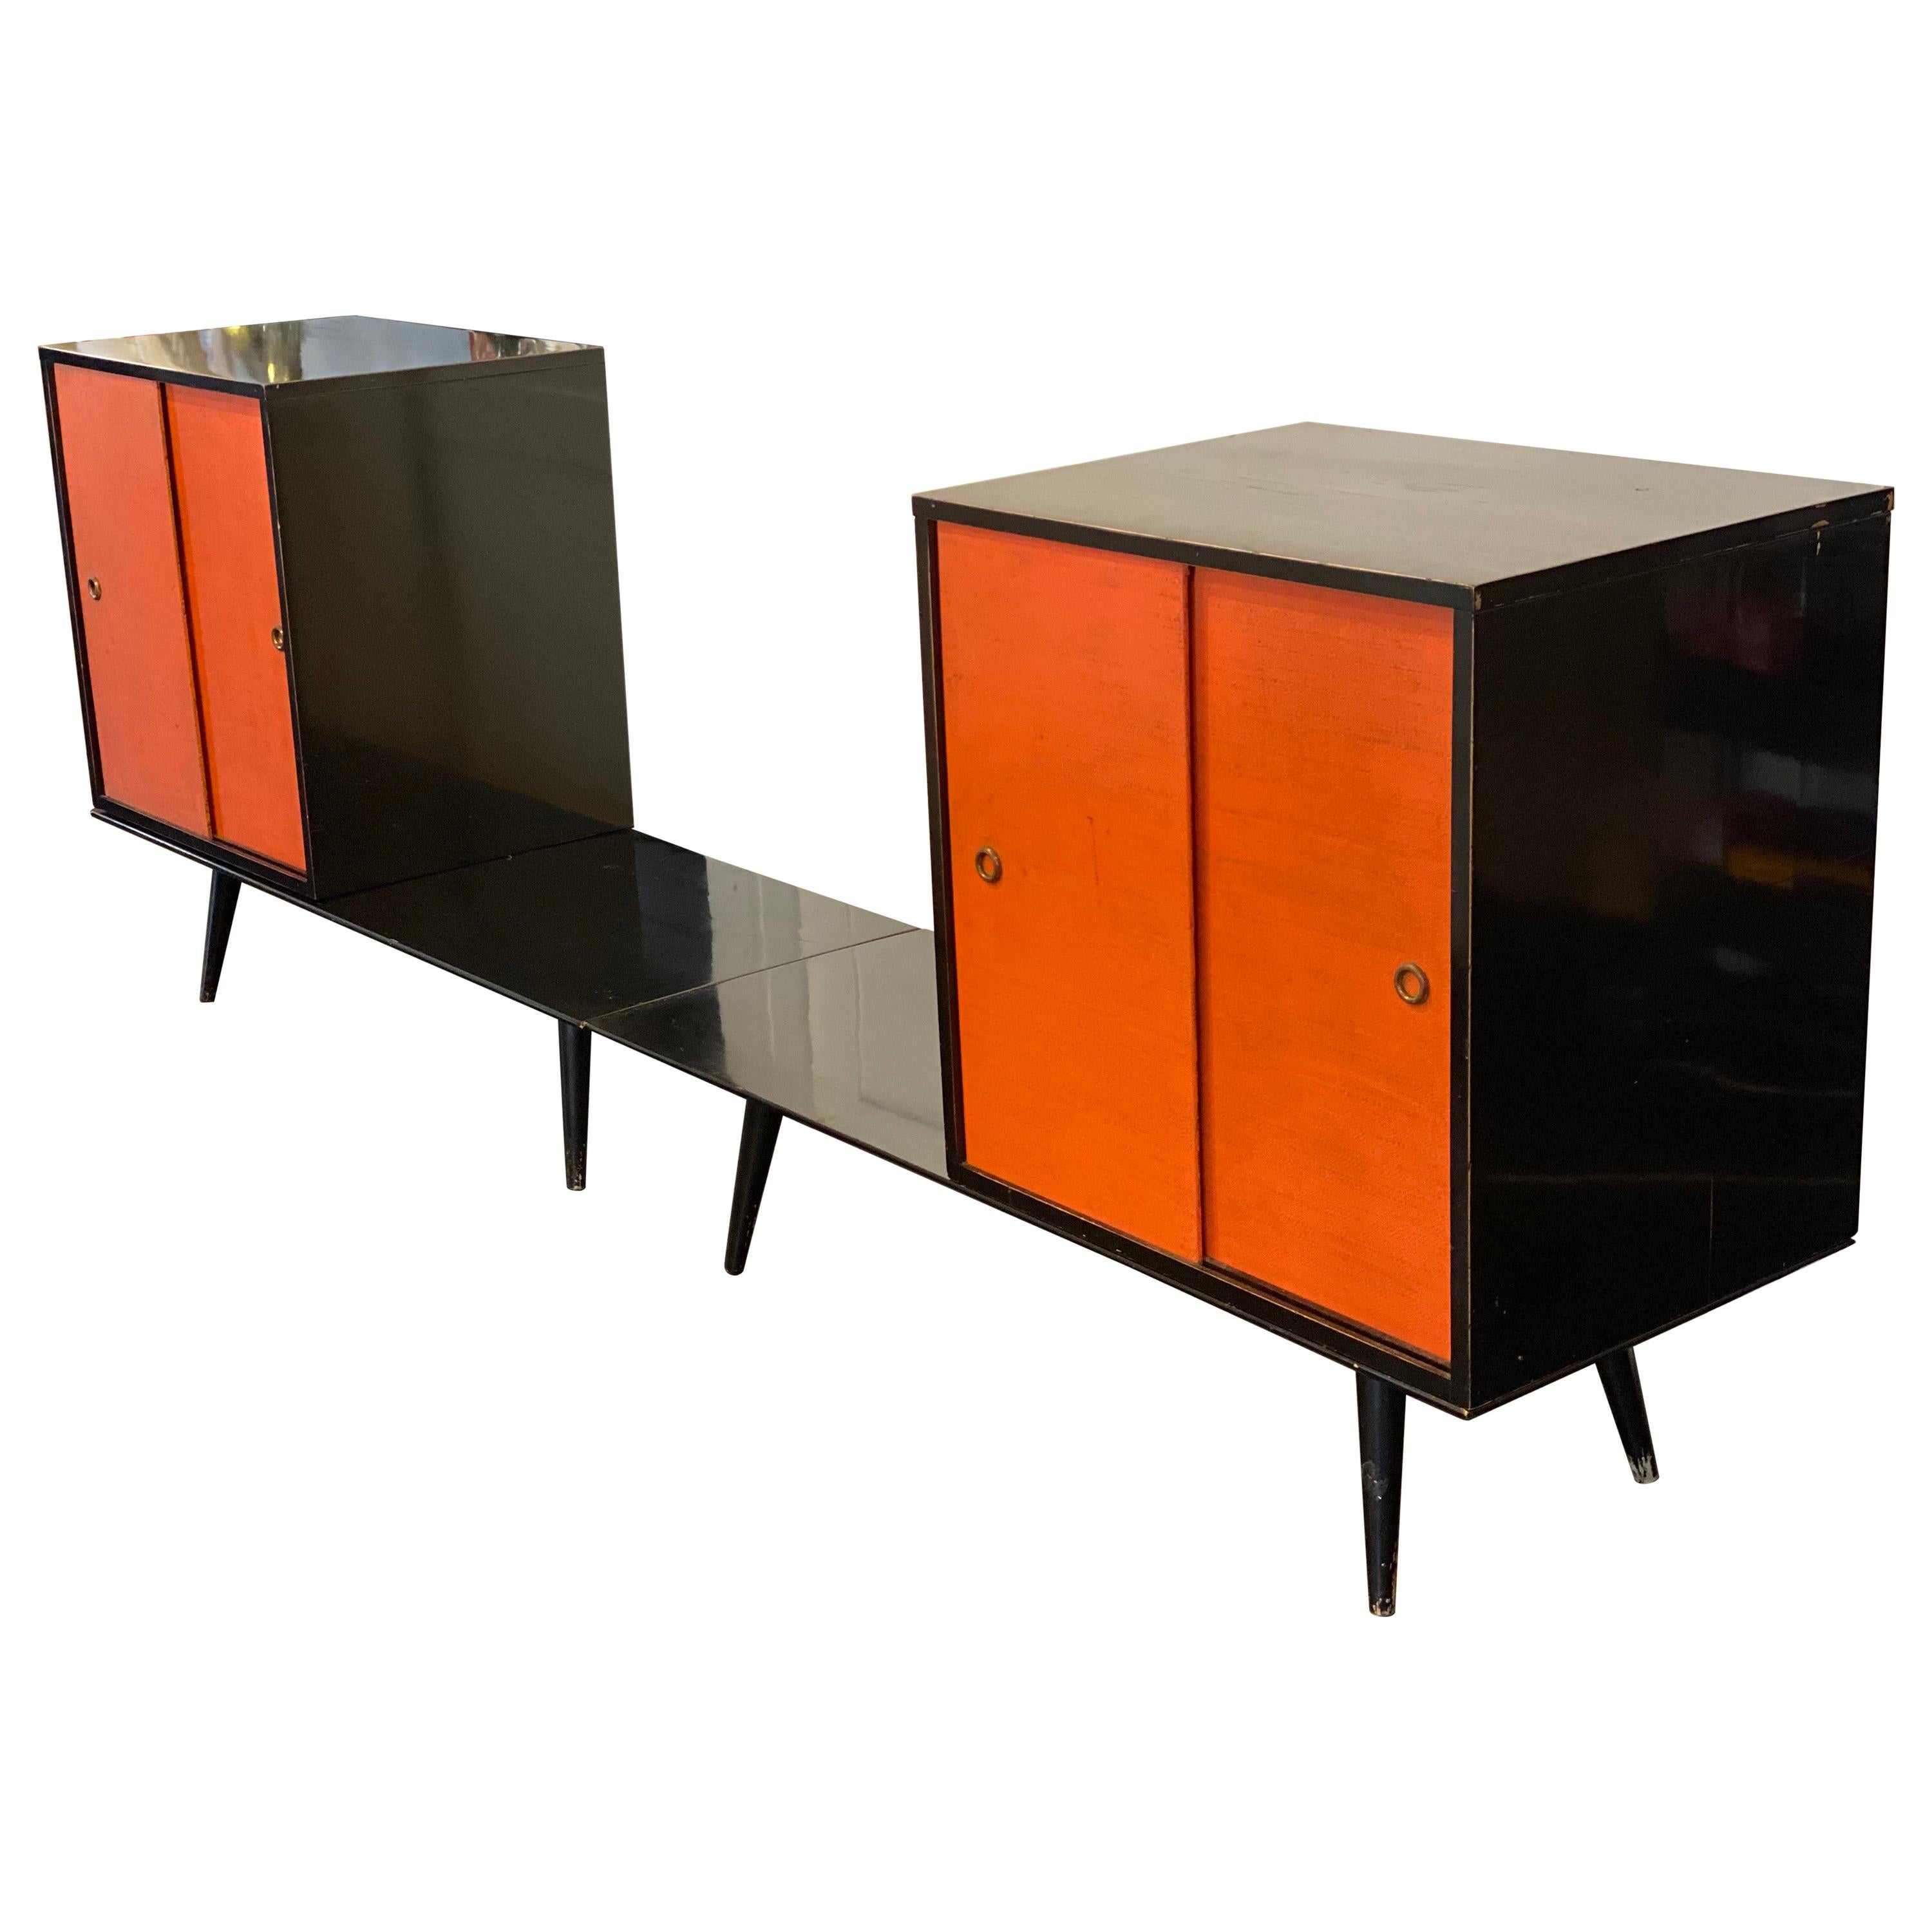 Midcentury Paul McCobb Planner Group Four Piece Cabinets with Benches, 1950s For Sale